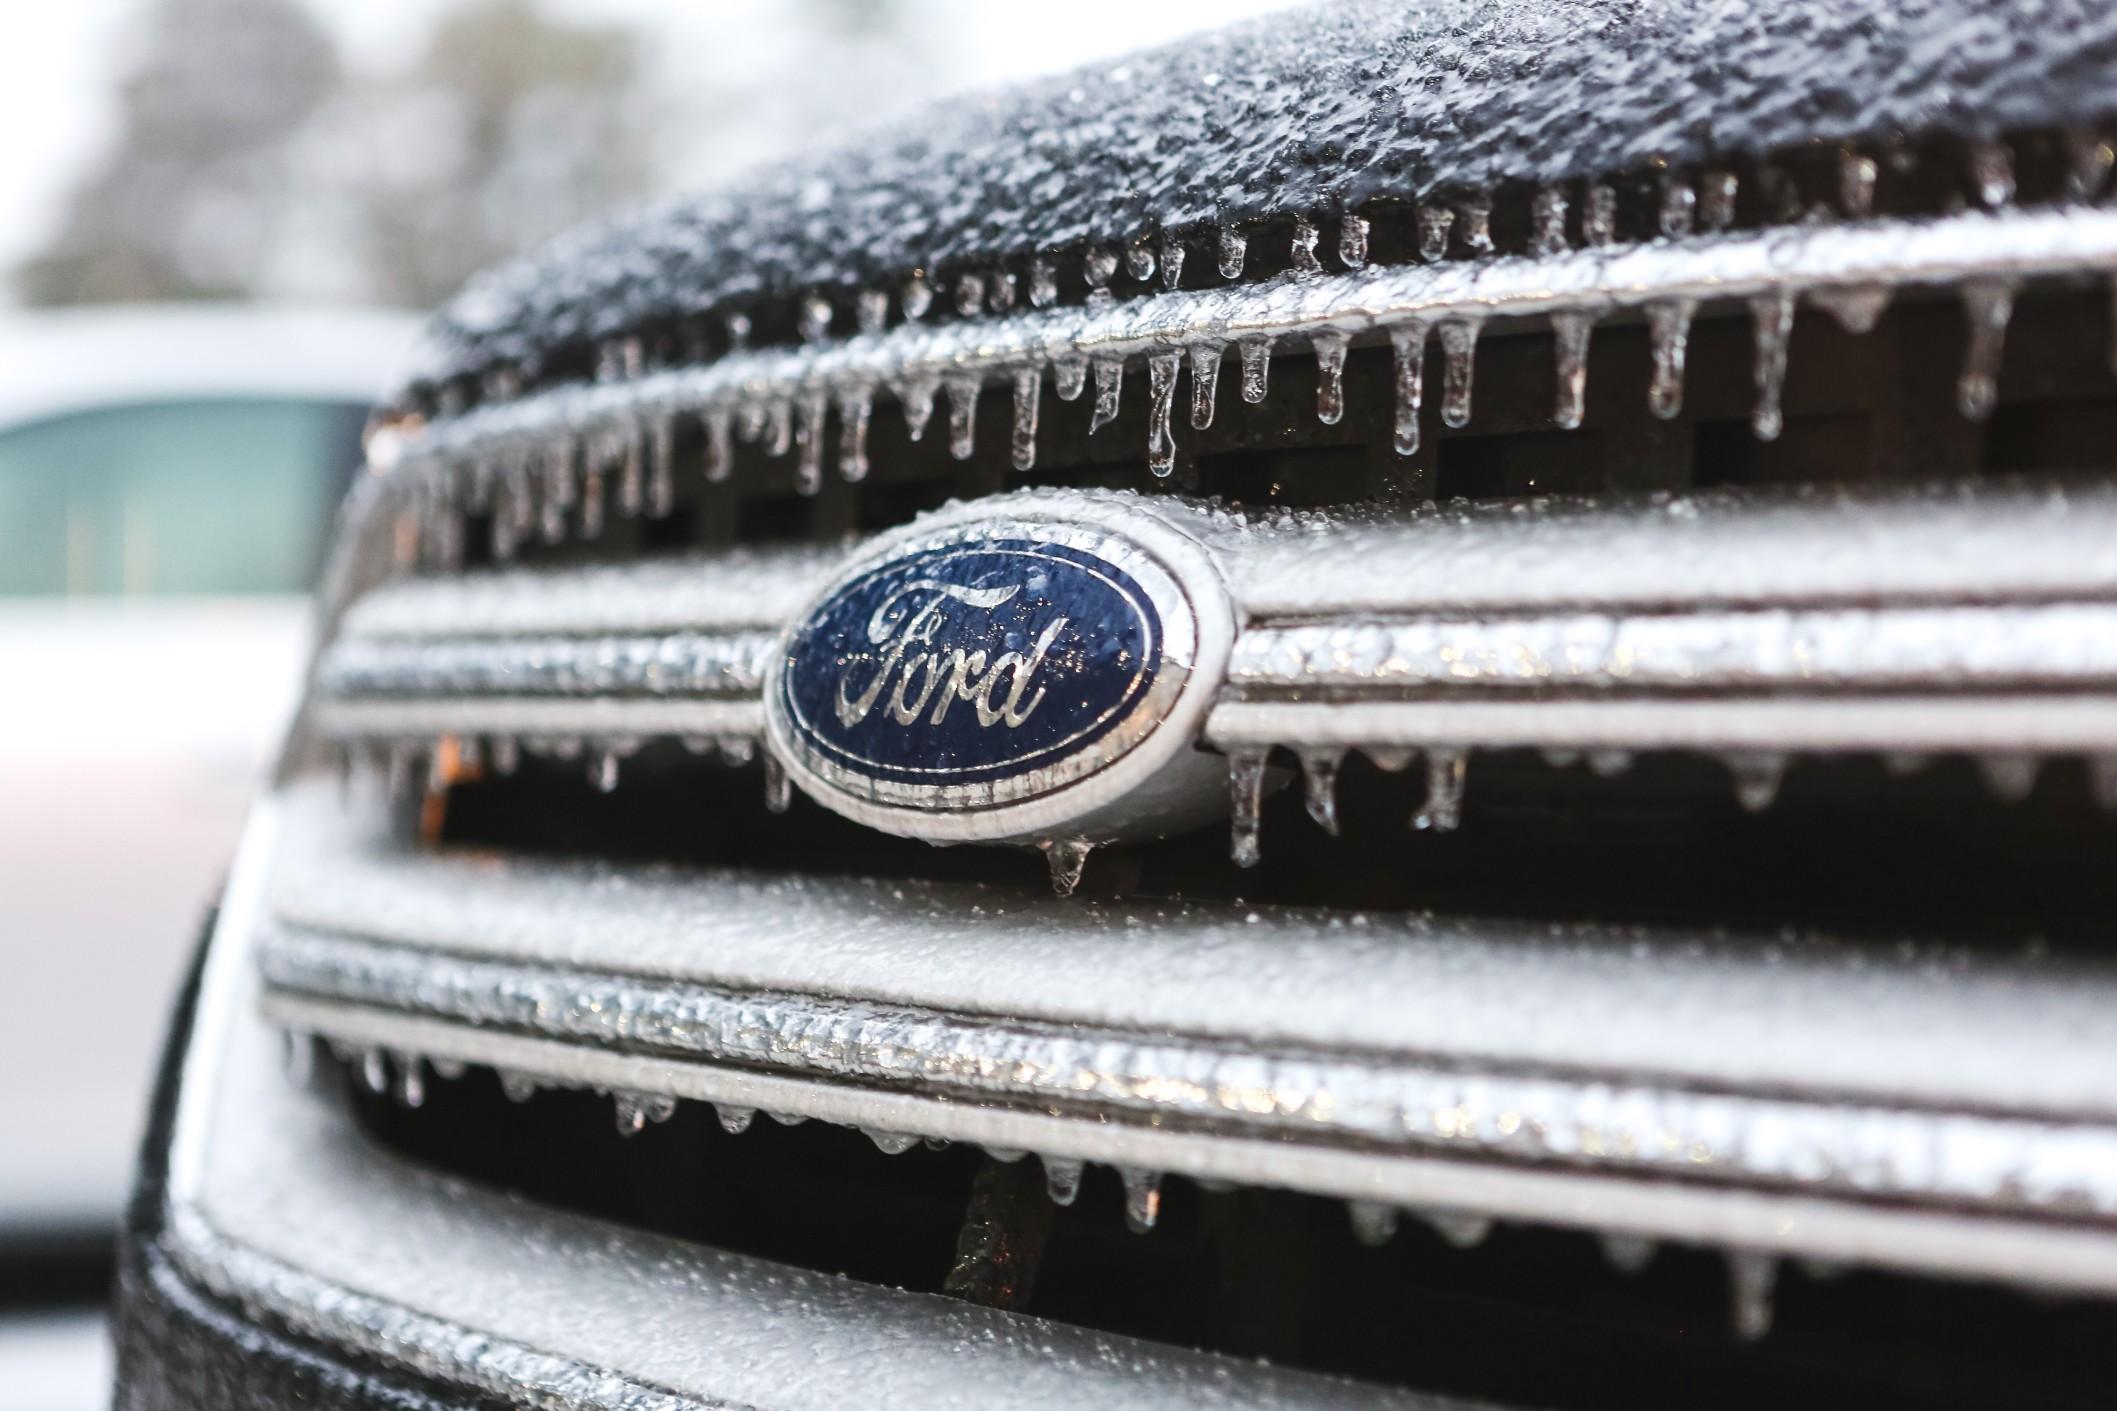 Closeup of the front of a Ford car that's icy